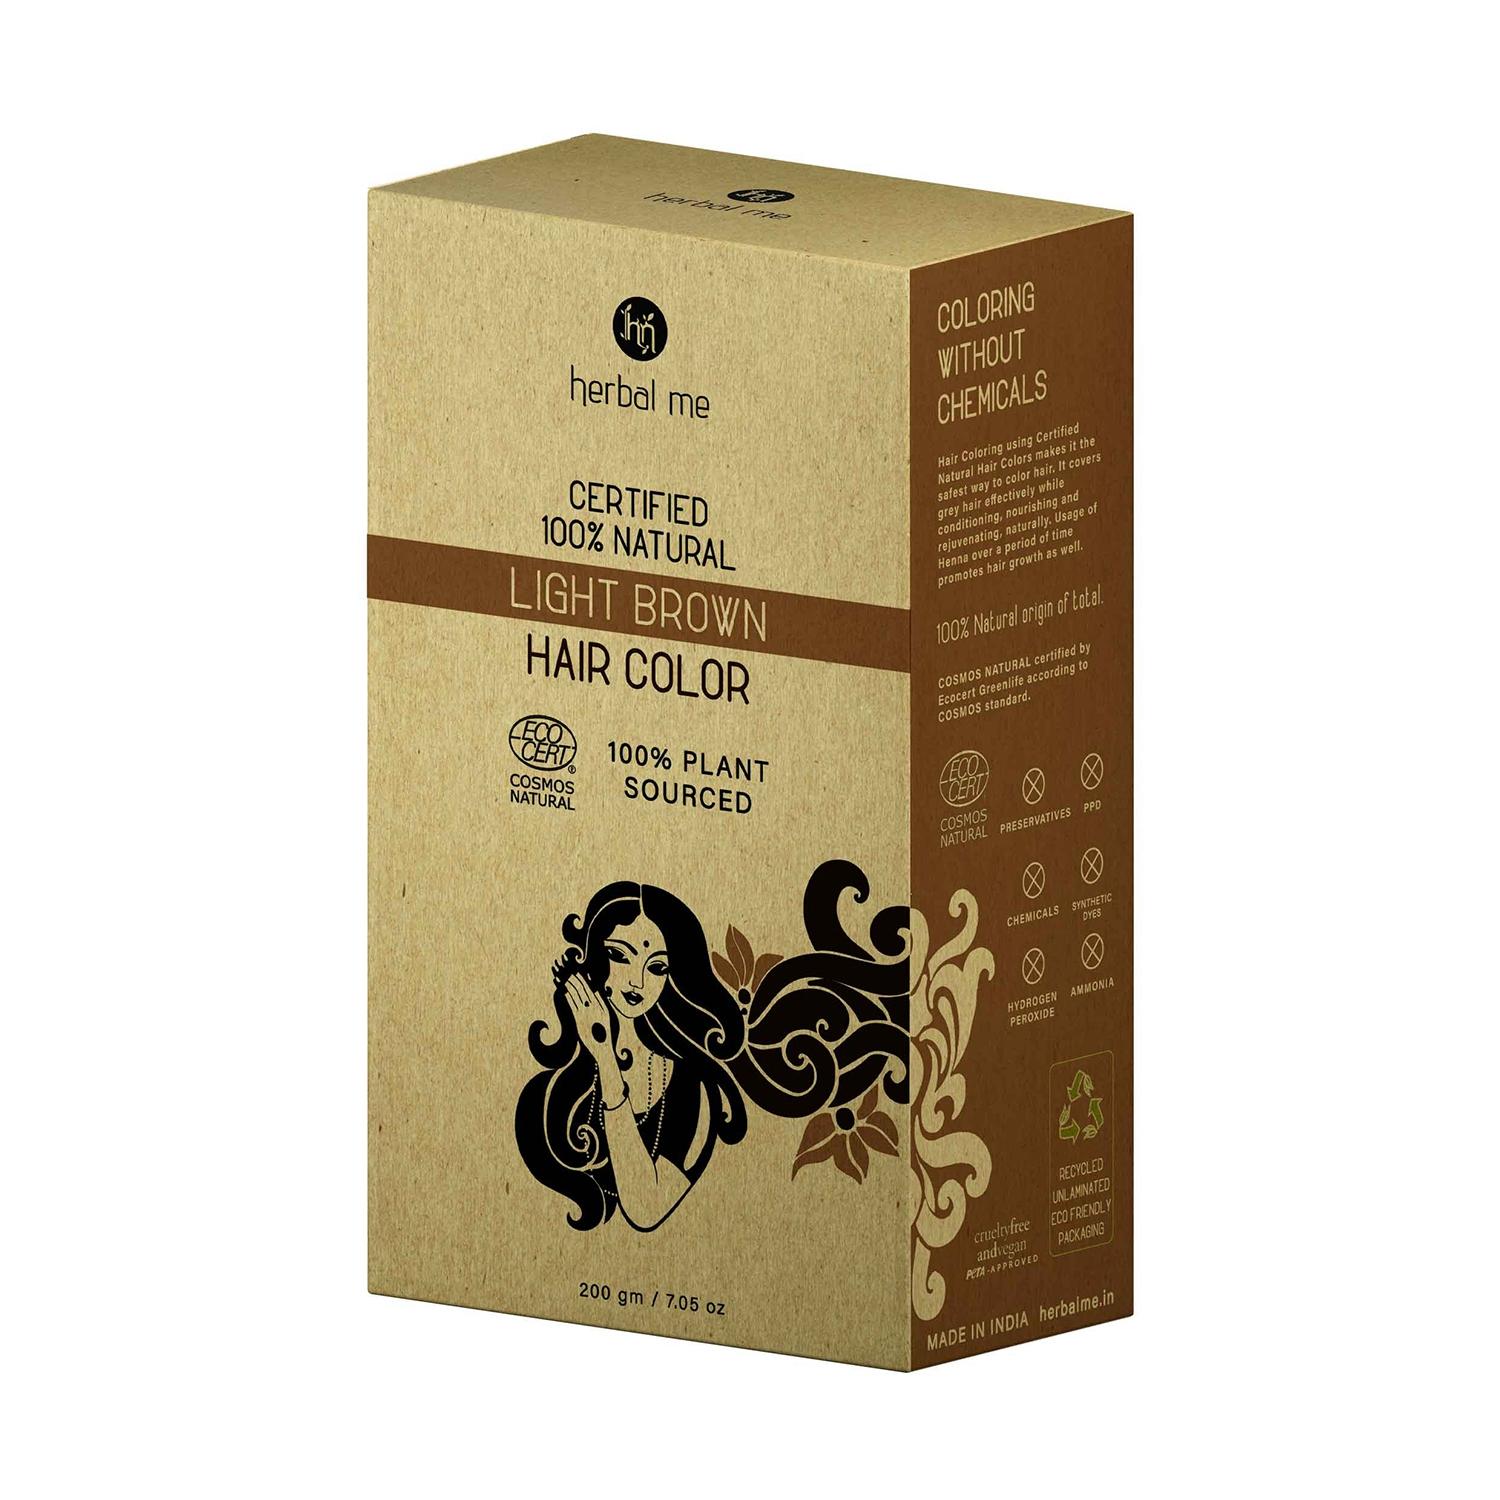 herbal me certified natural henna hair color - light brown (200g)